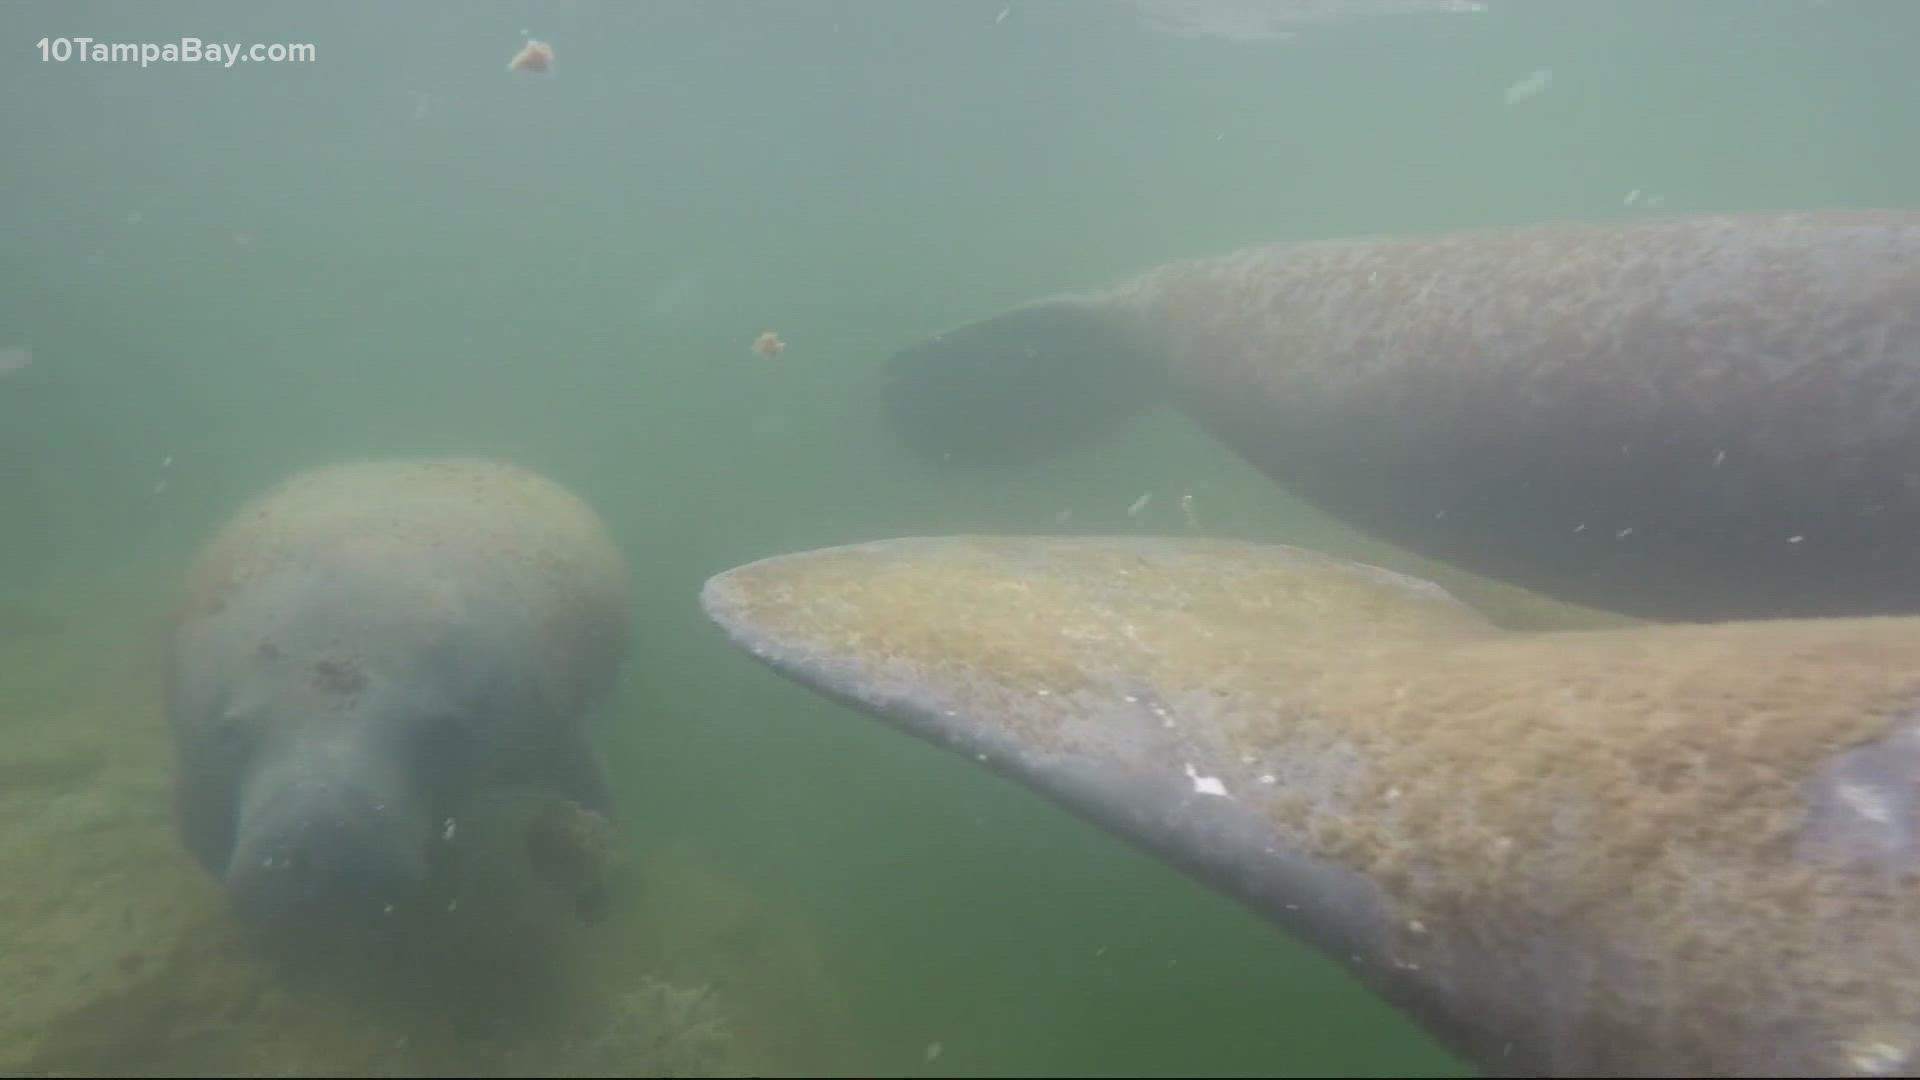 The state's joint task force says it is still seeing more dead or distressed manatees than normal.